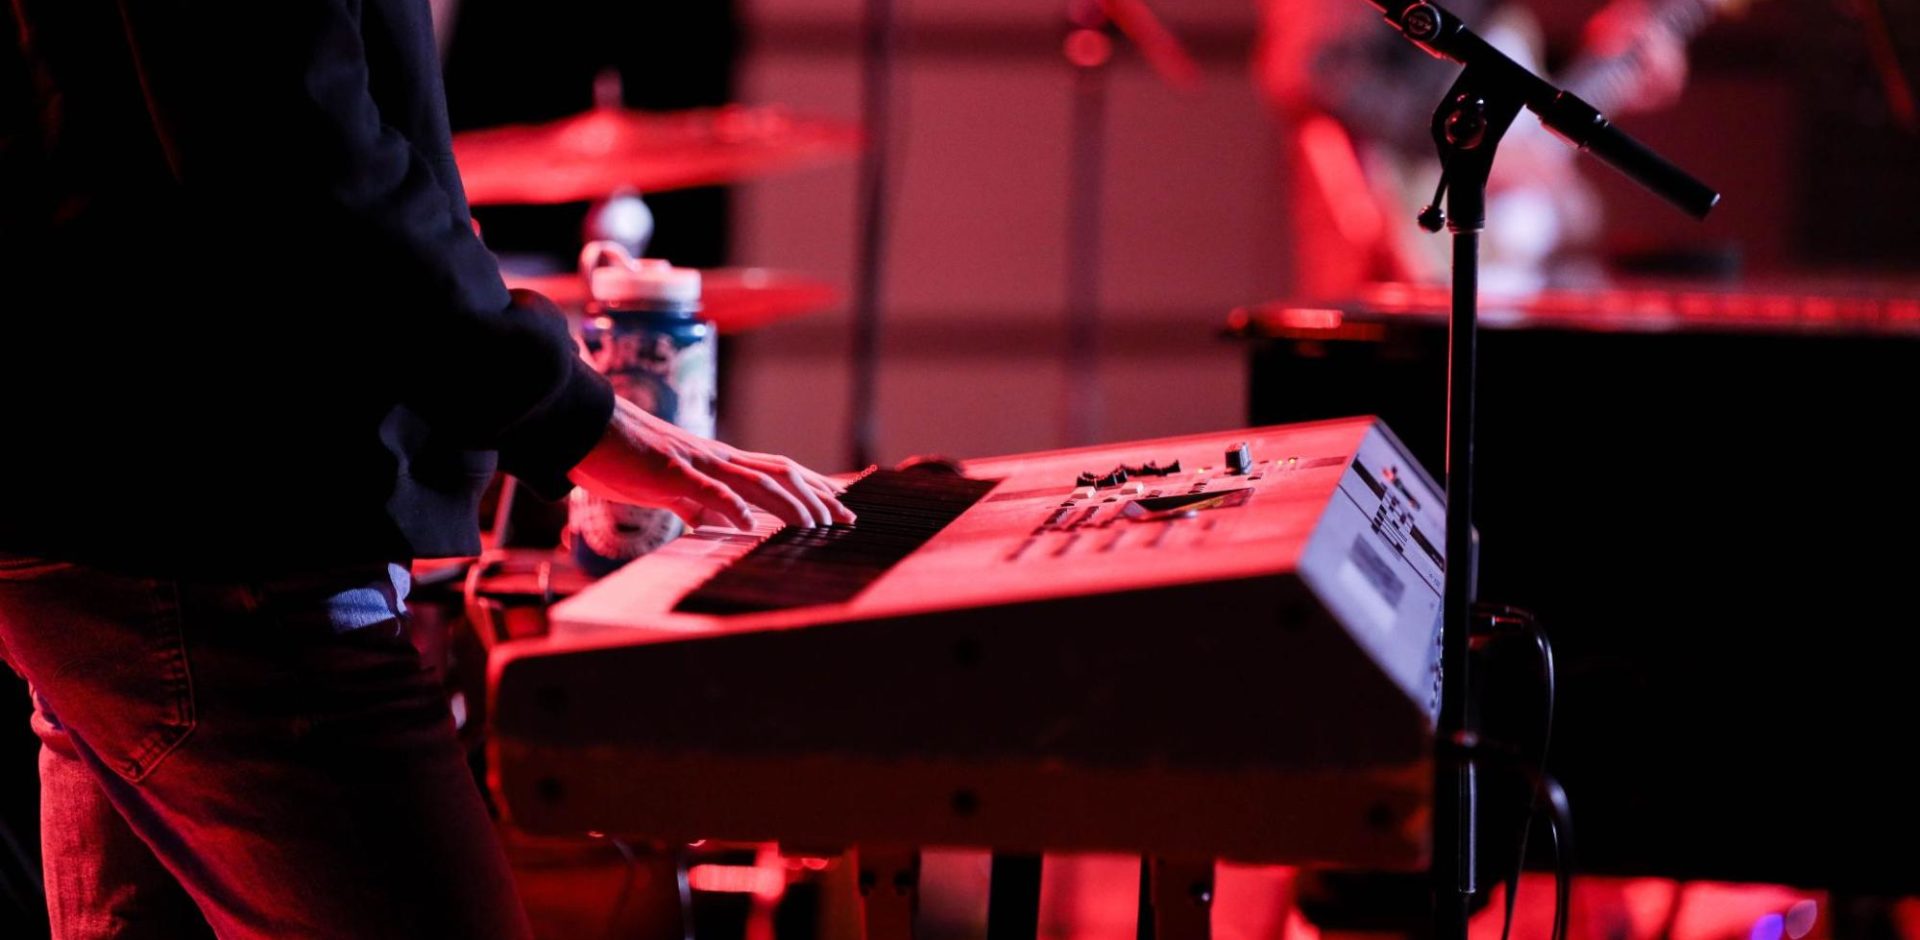 A man plays a keyboard during a live performance with his band in the background